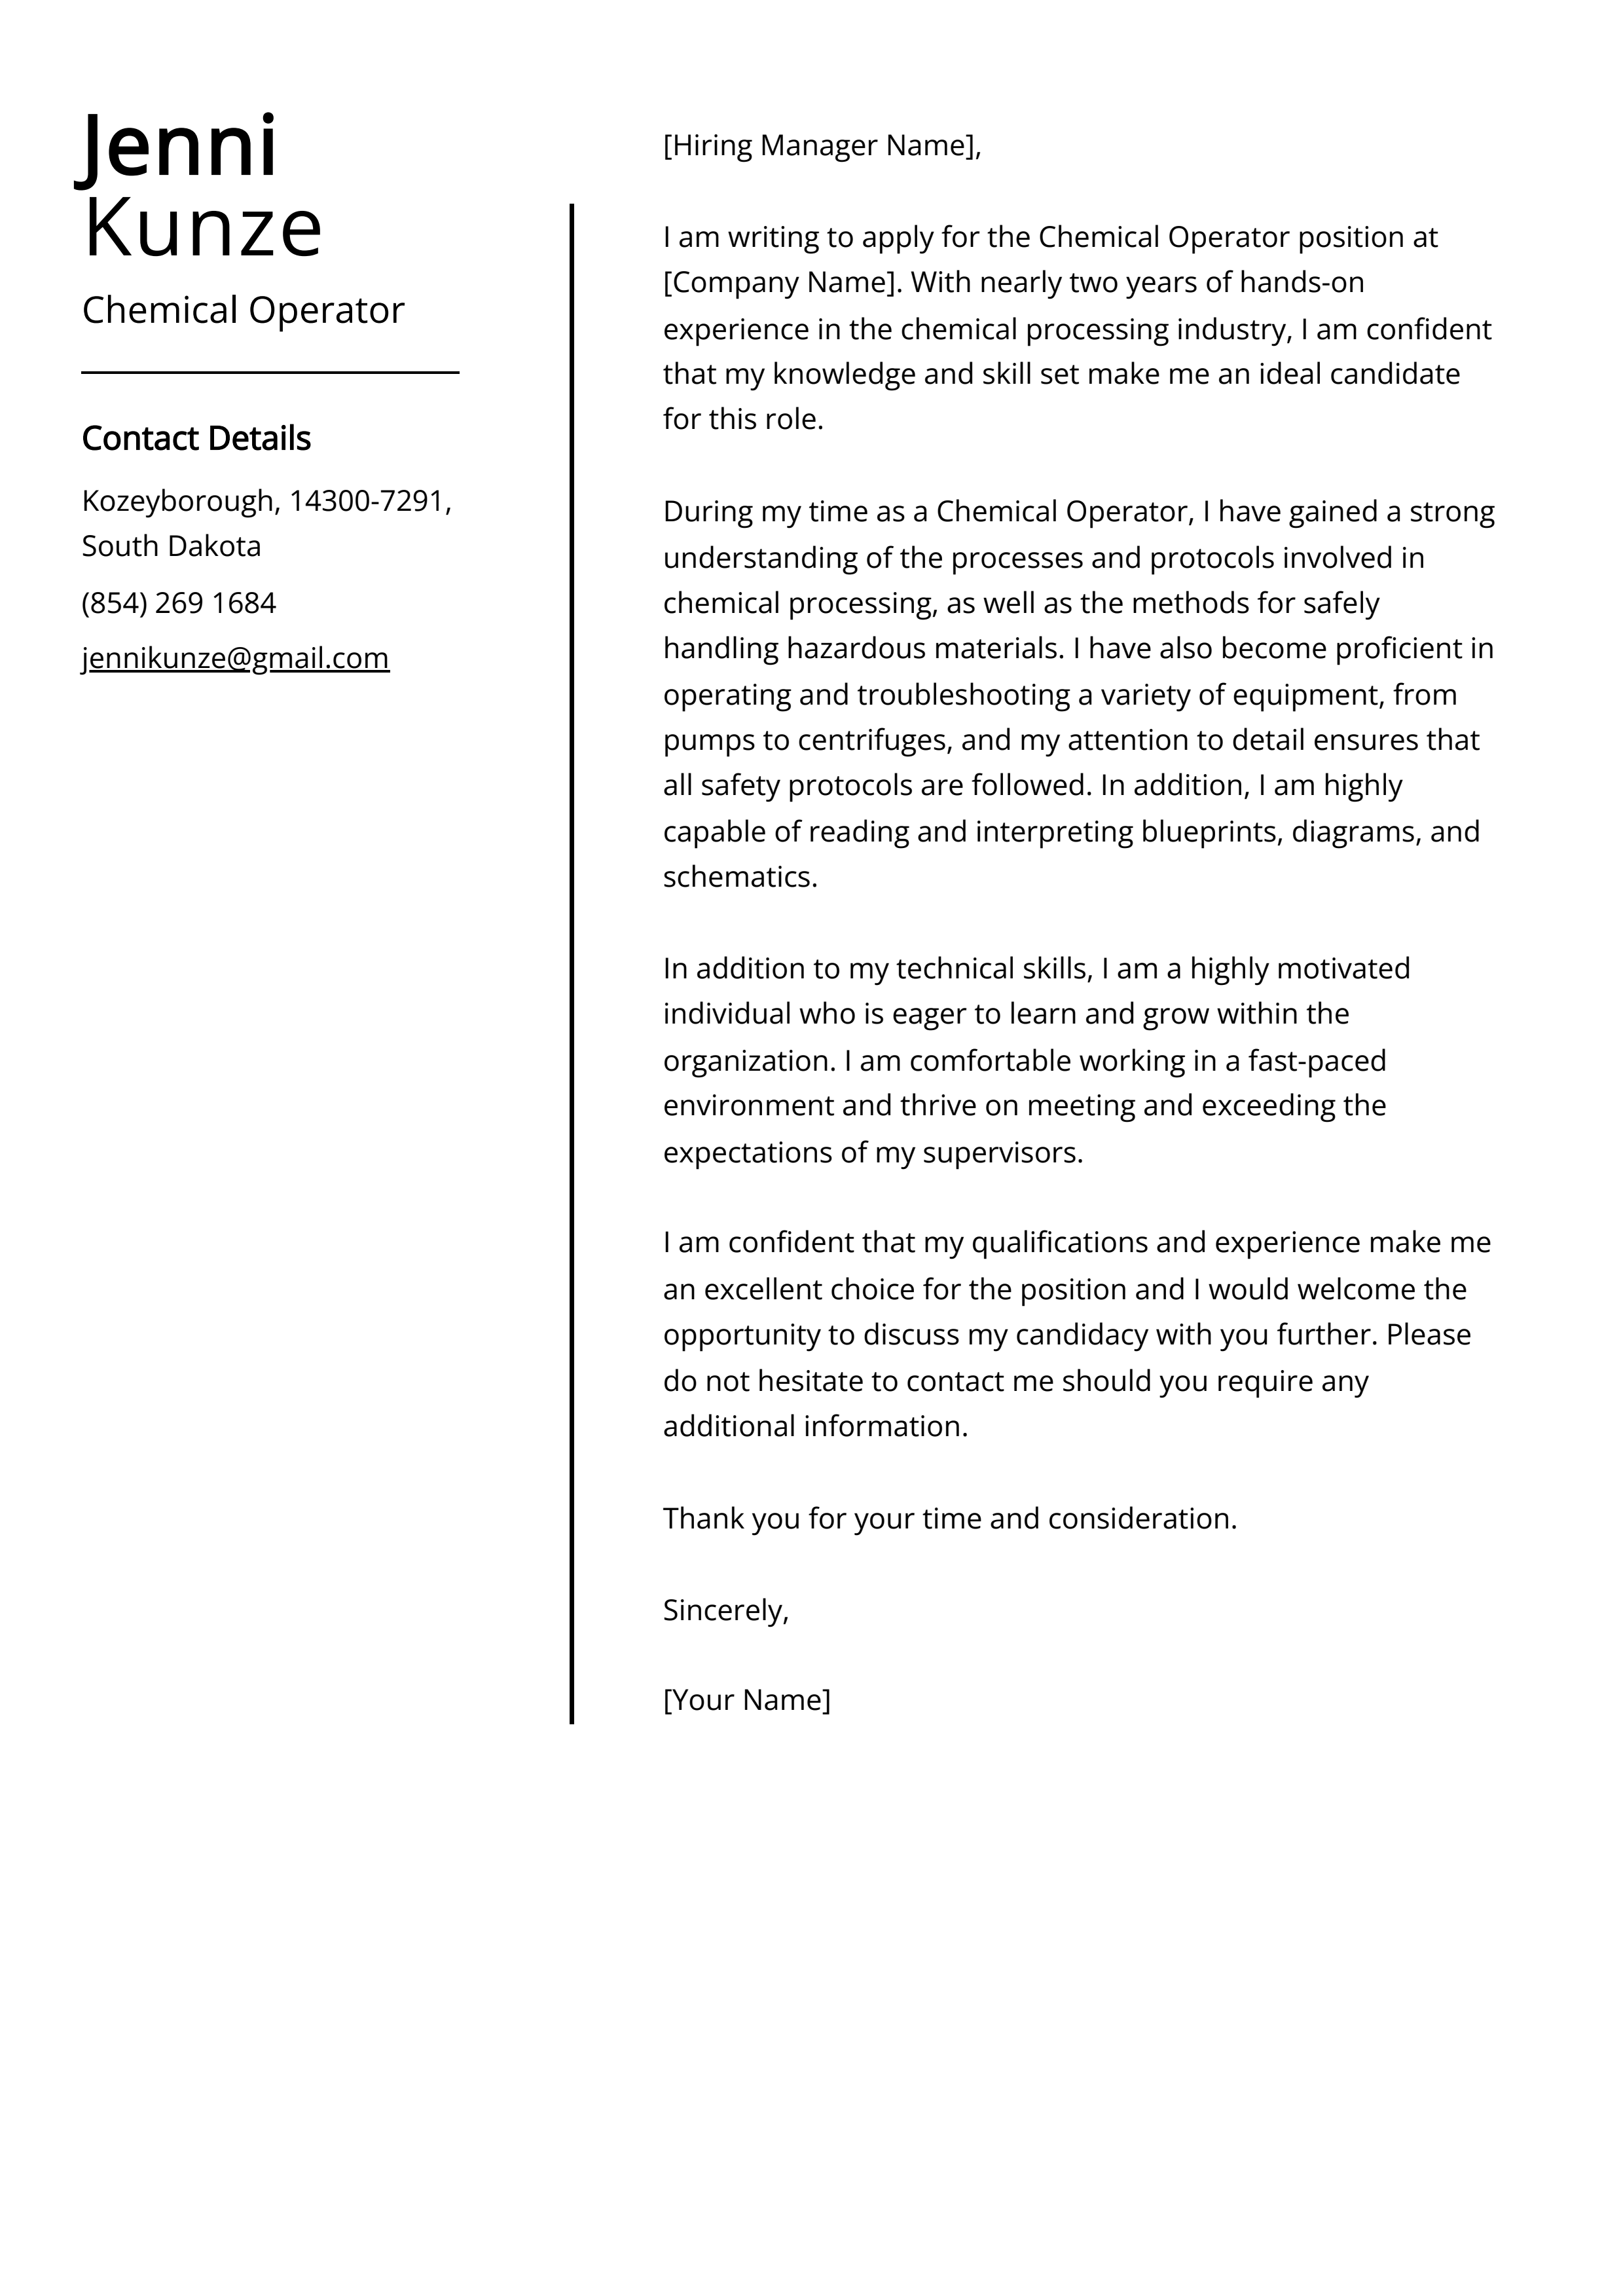 Chemical Operator Cover Letter Example